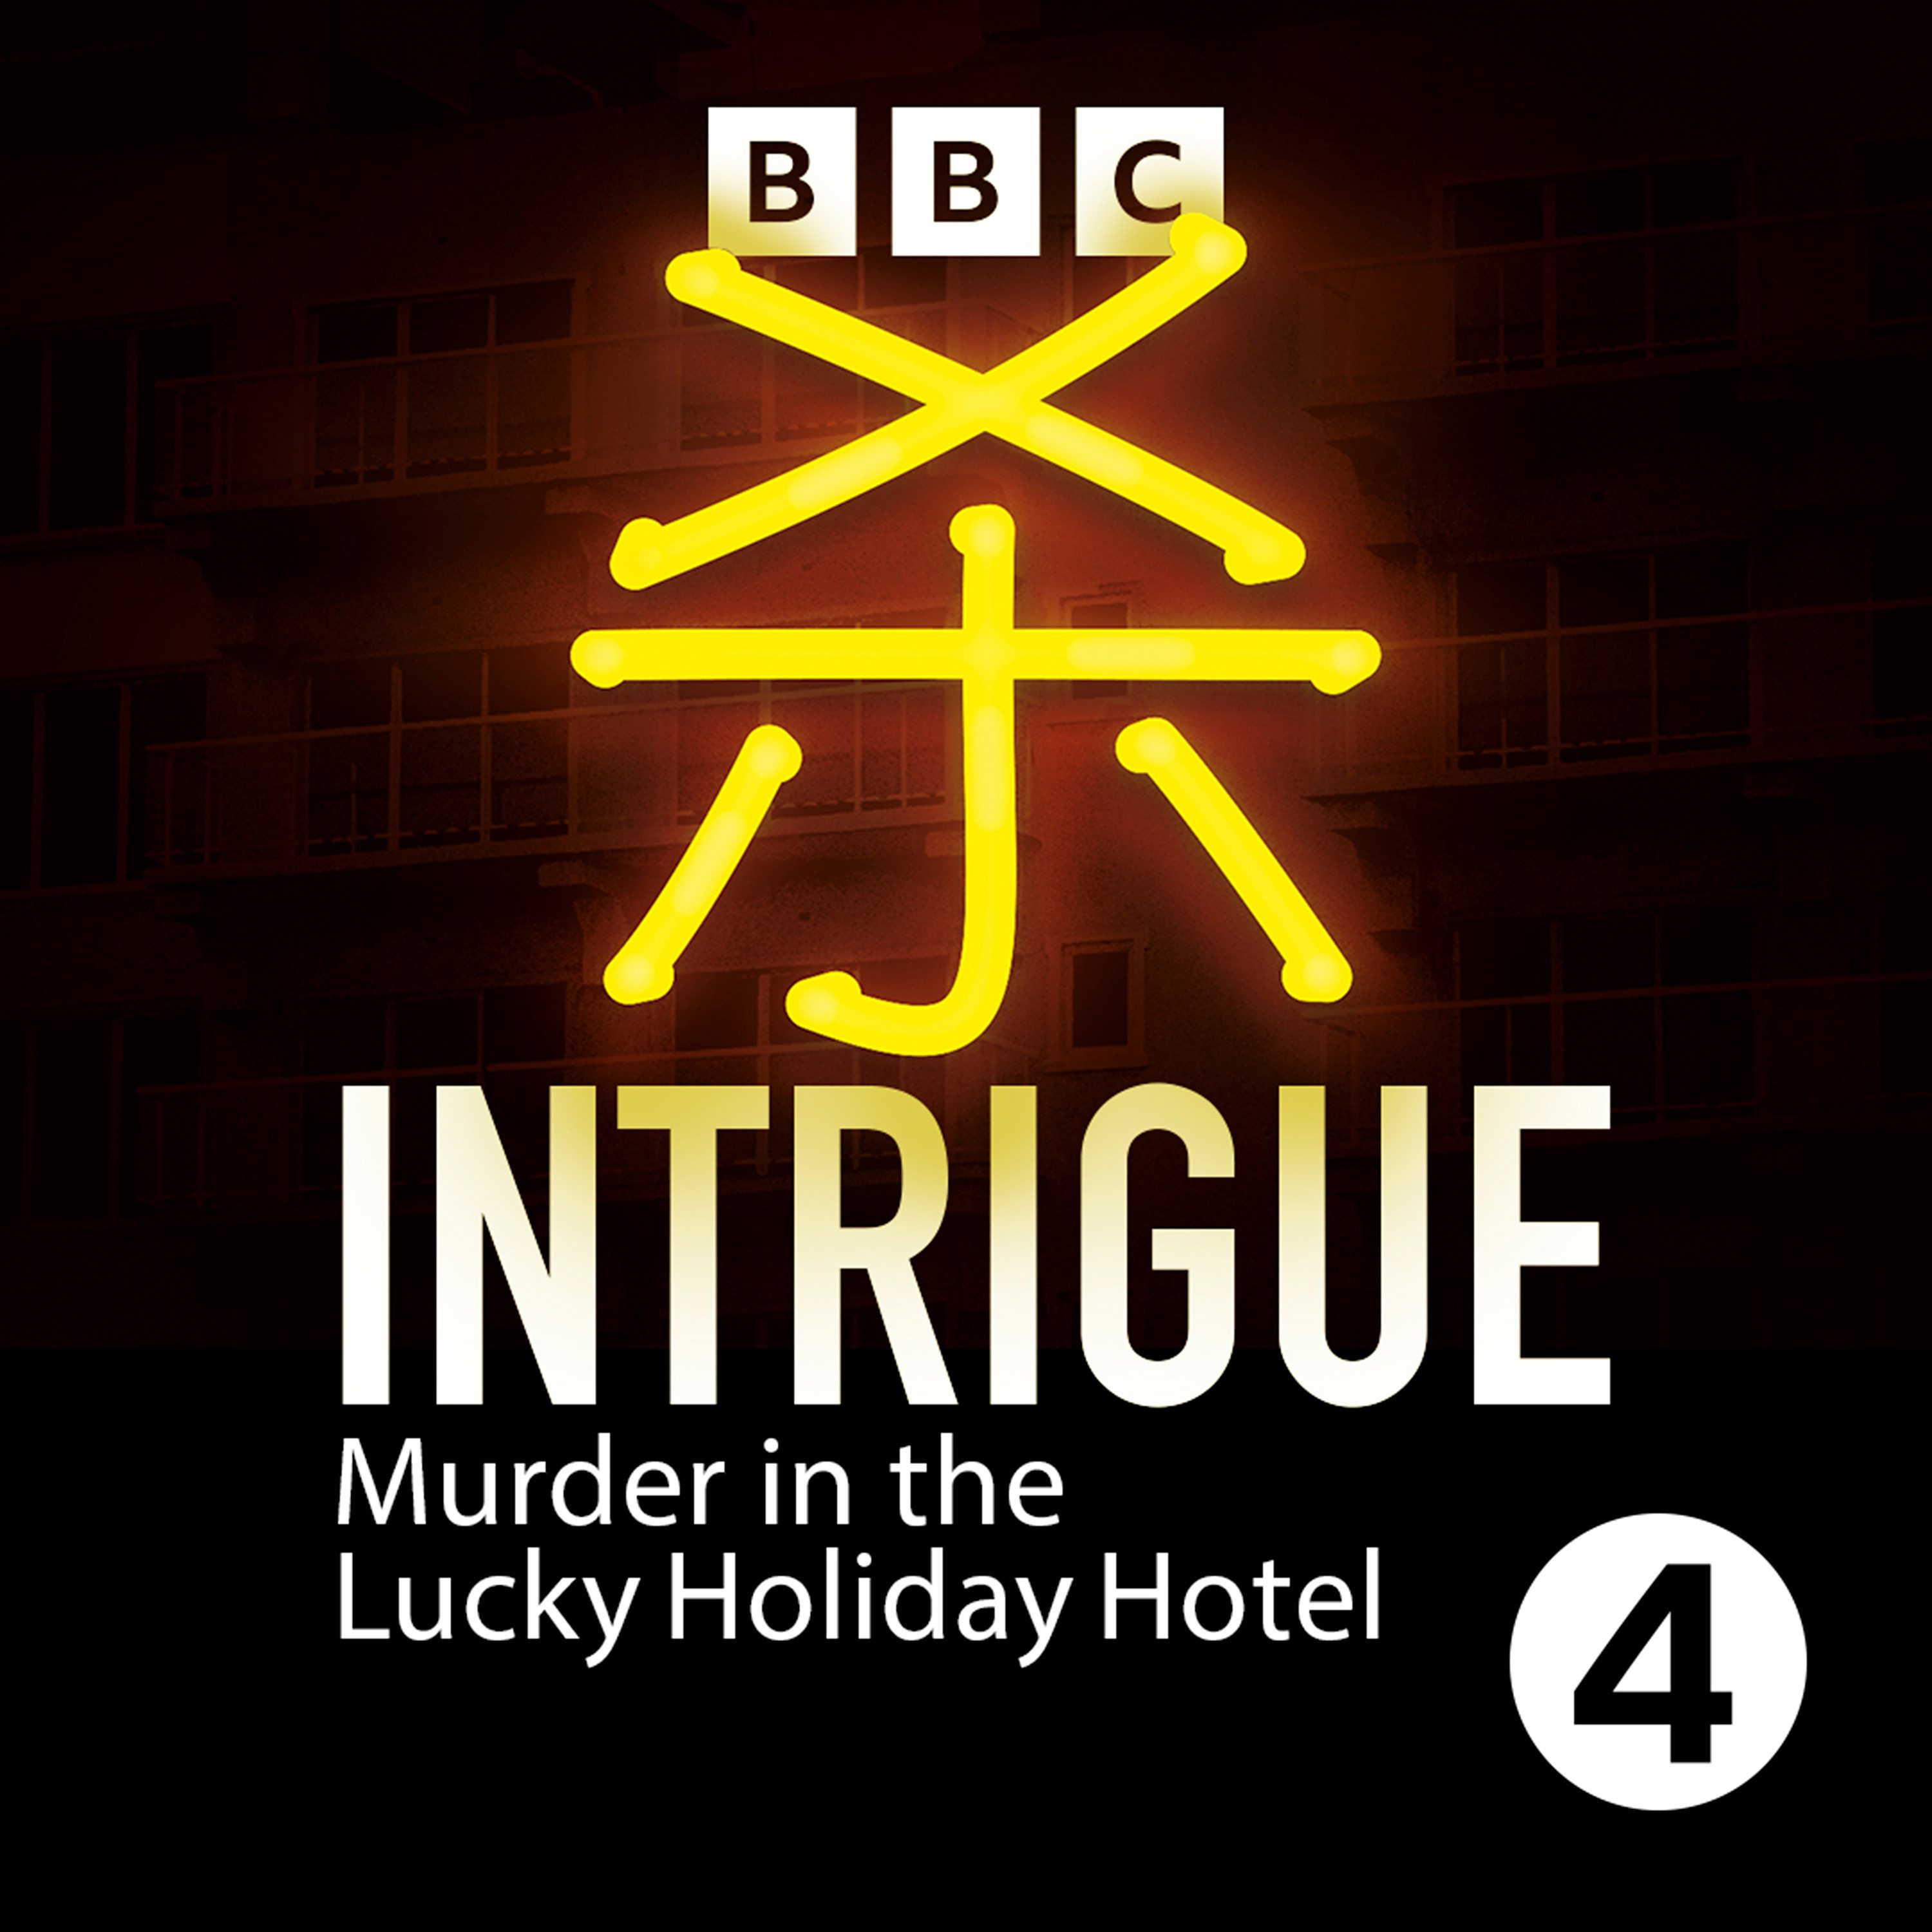 Welcome to Intrigue: Murder in the Lucky Holiday Hotel